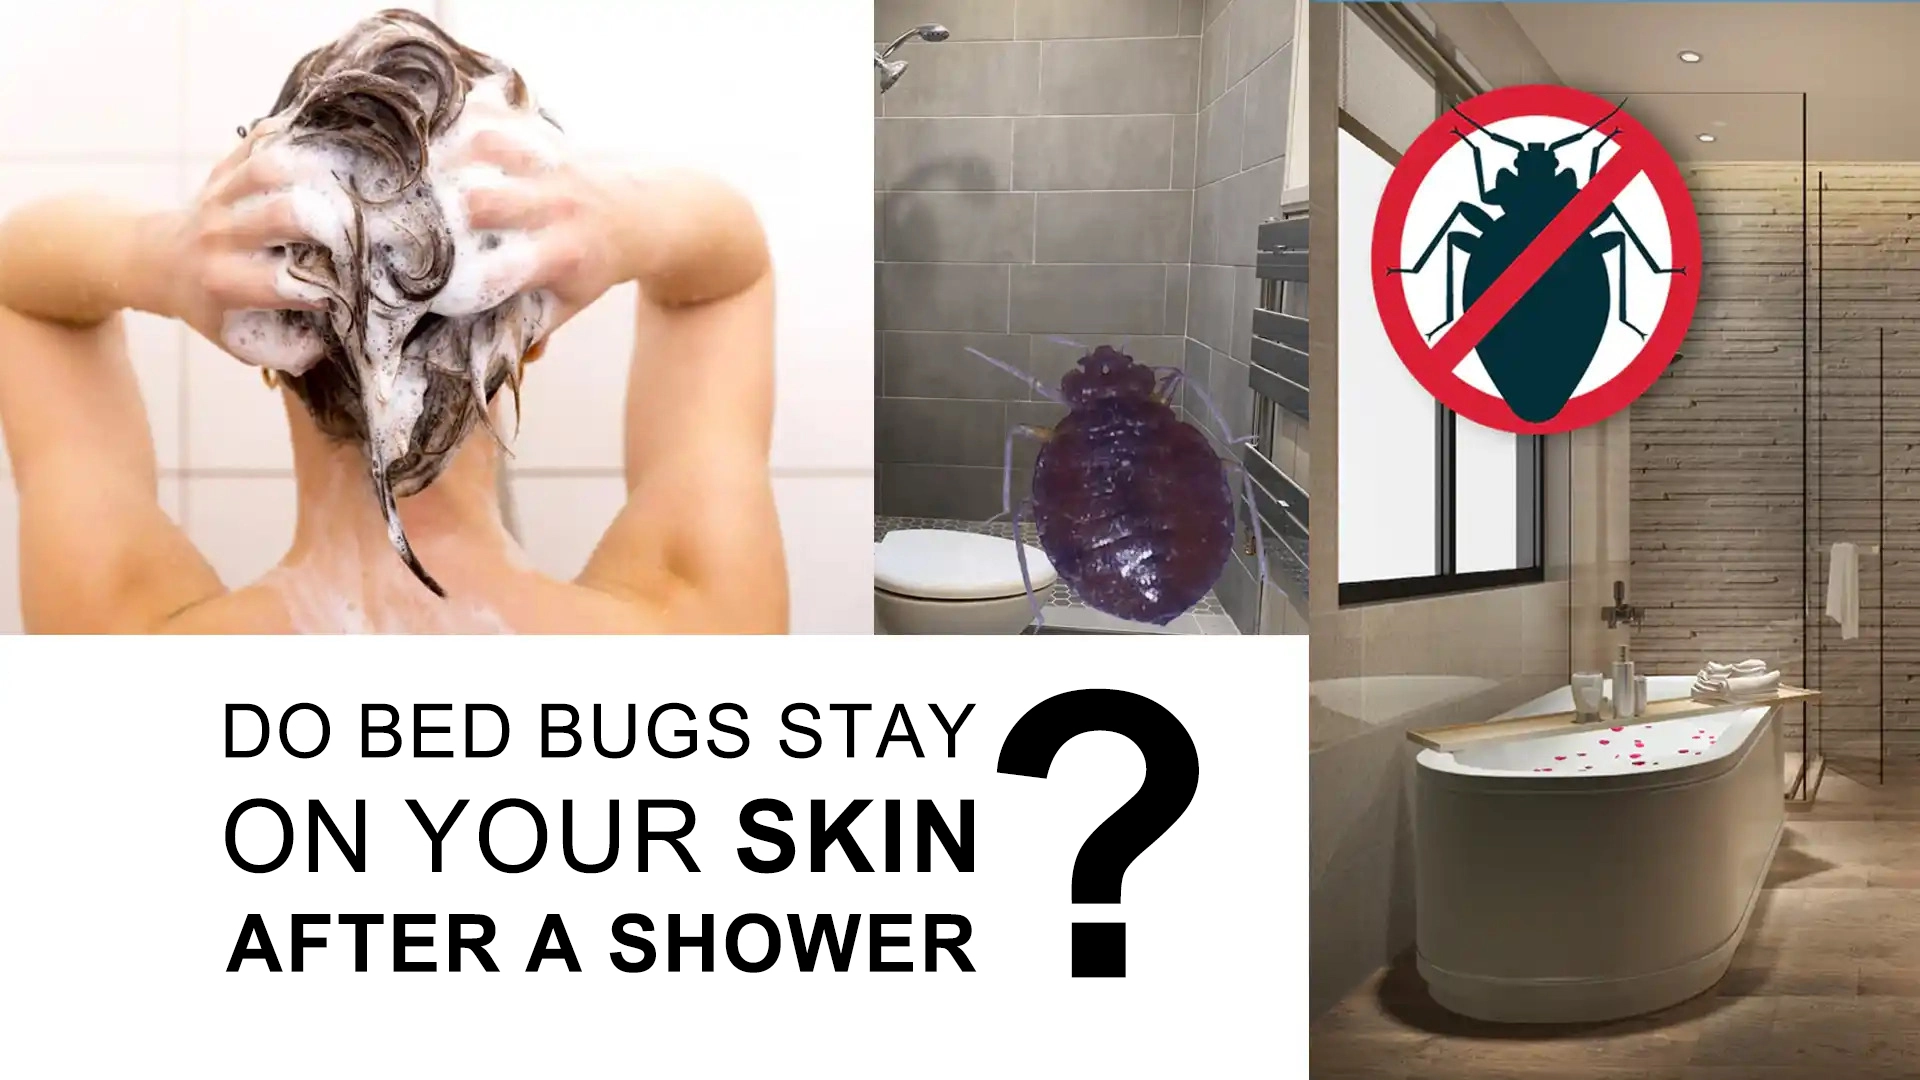 Do bed bugs stay on your skin after a shower